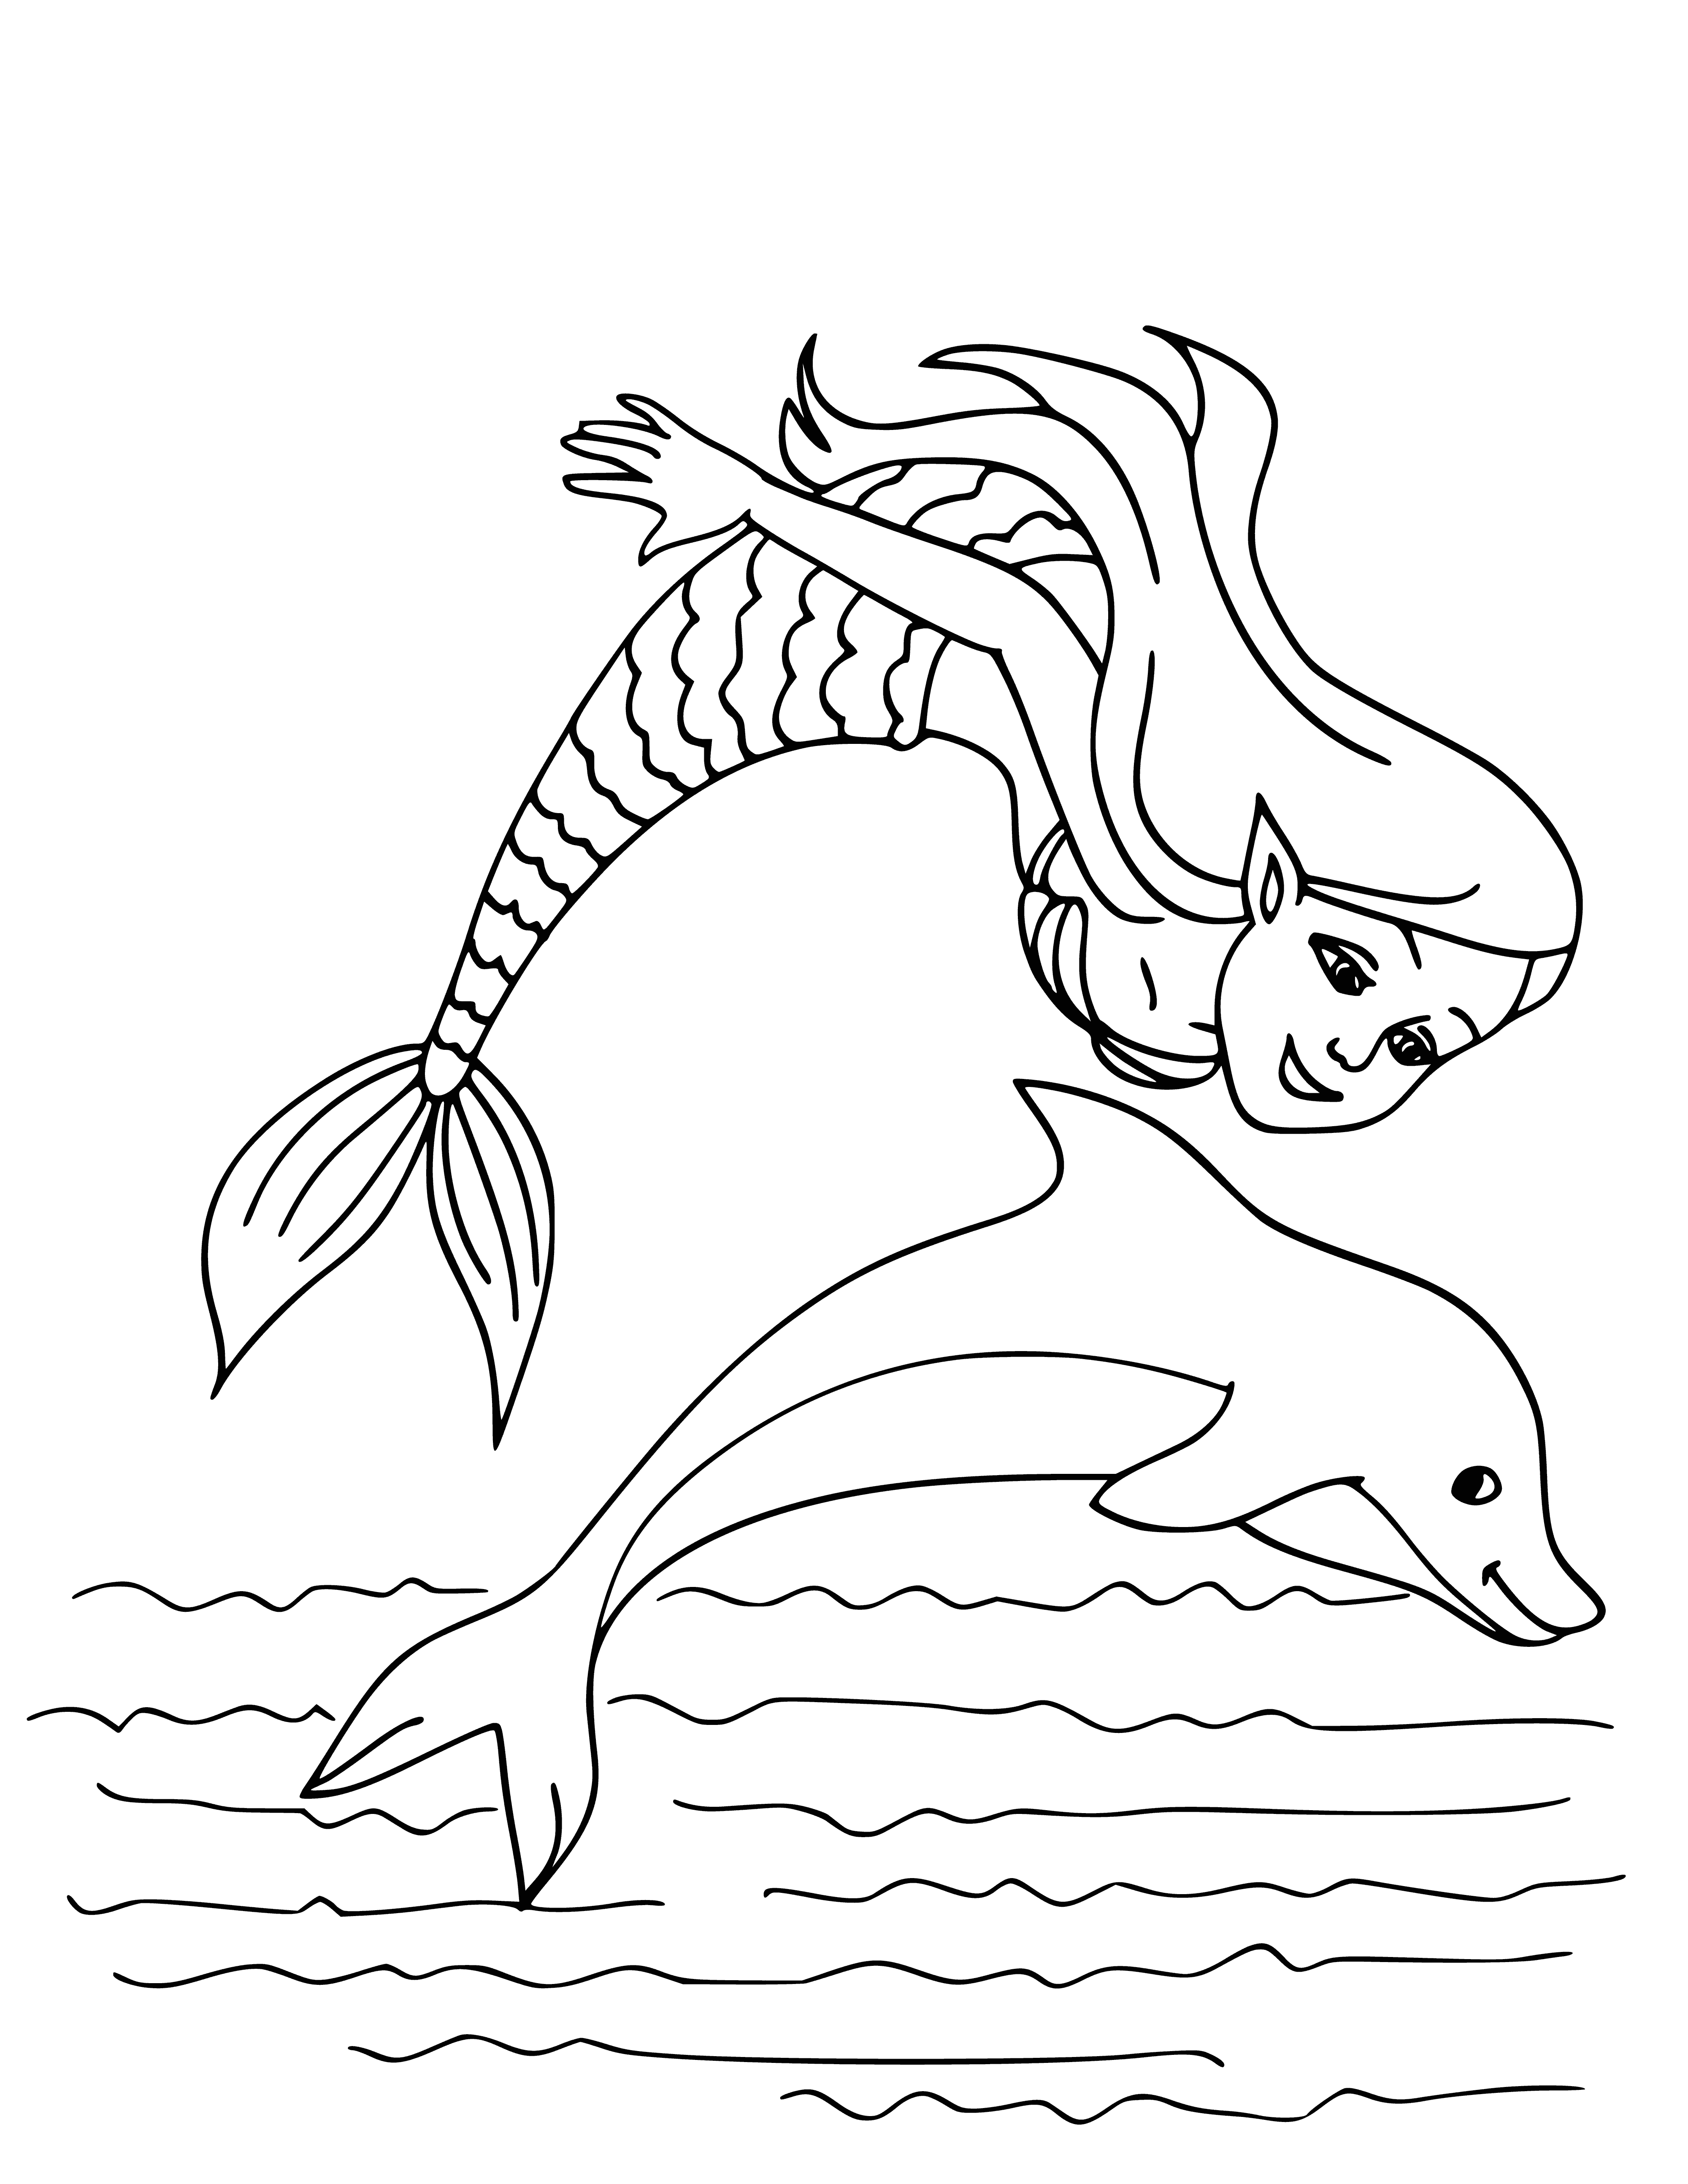 Mermaid and Dolphin coloring page